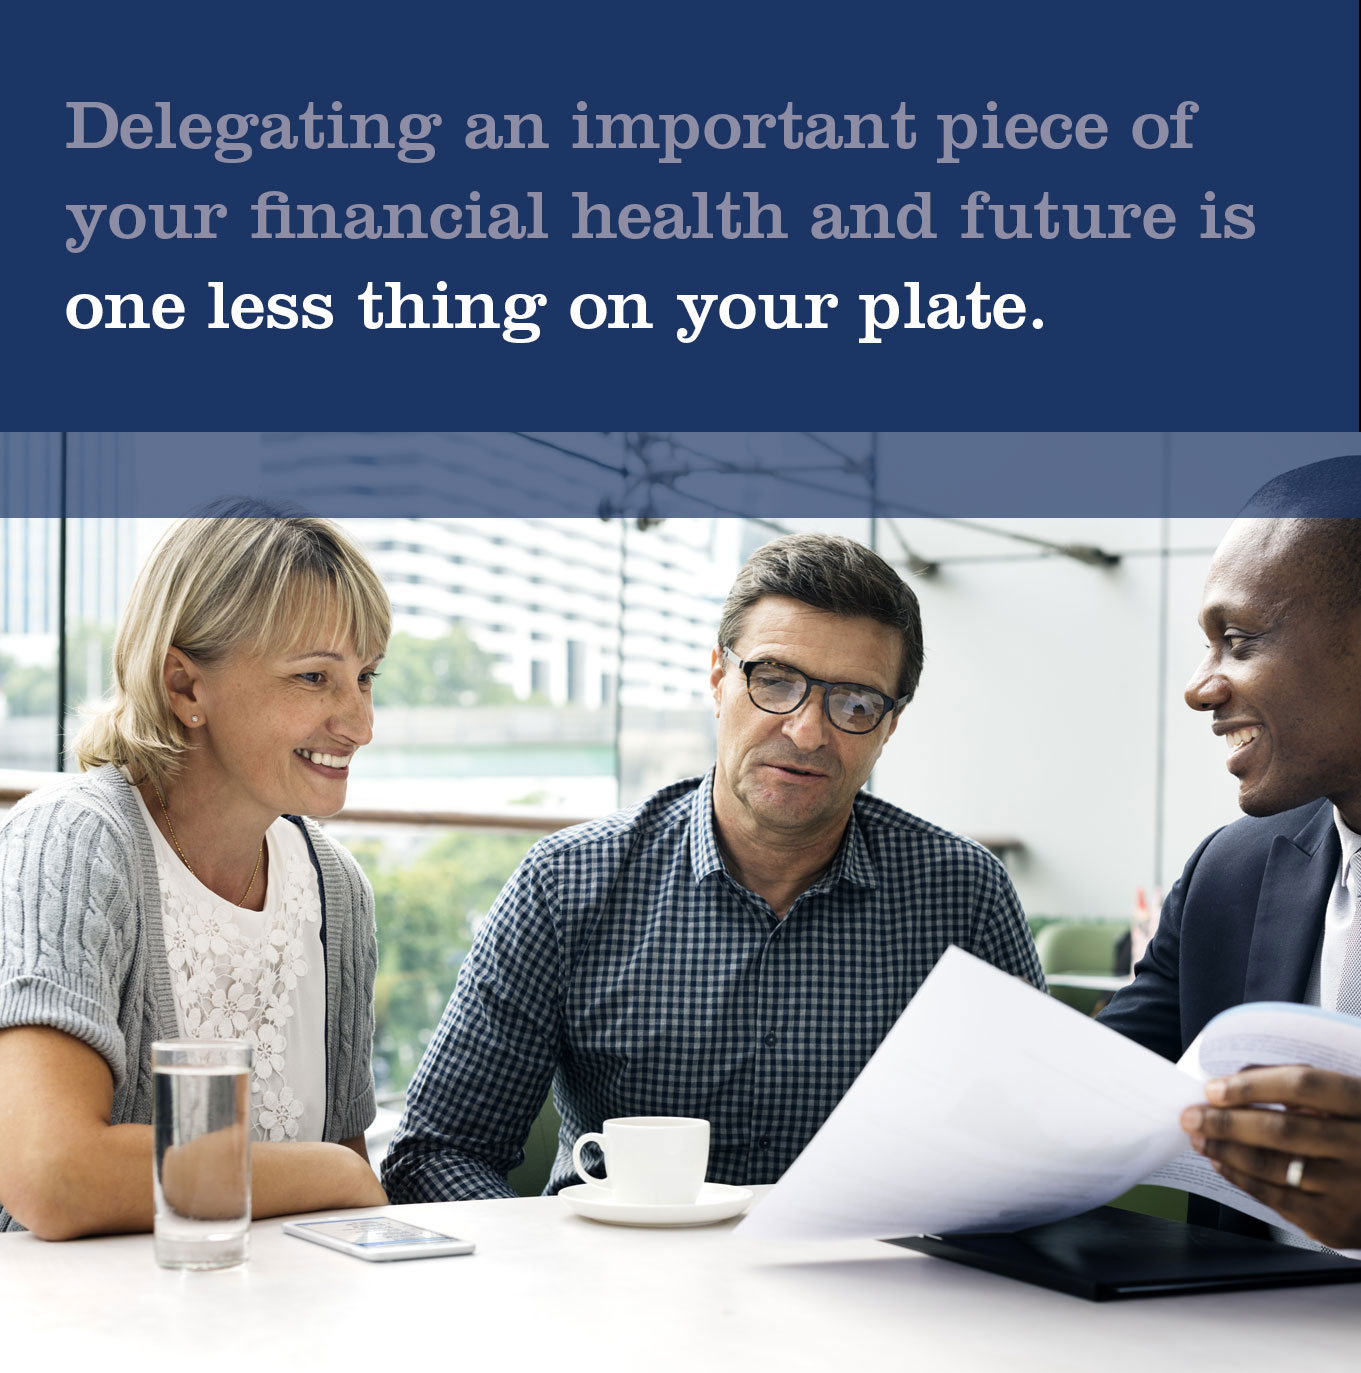 Delegating an important piece of your financial health an future is one less thing on your plate.